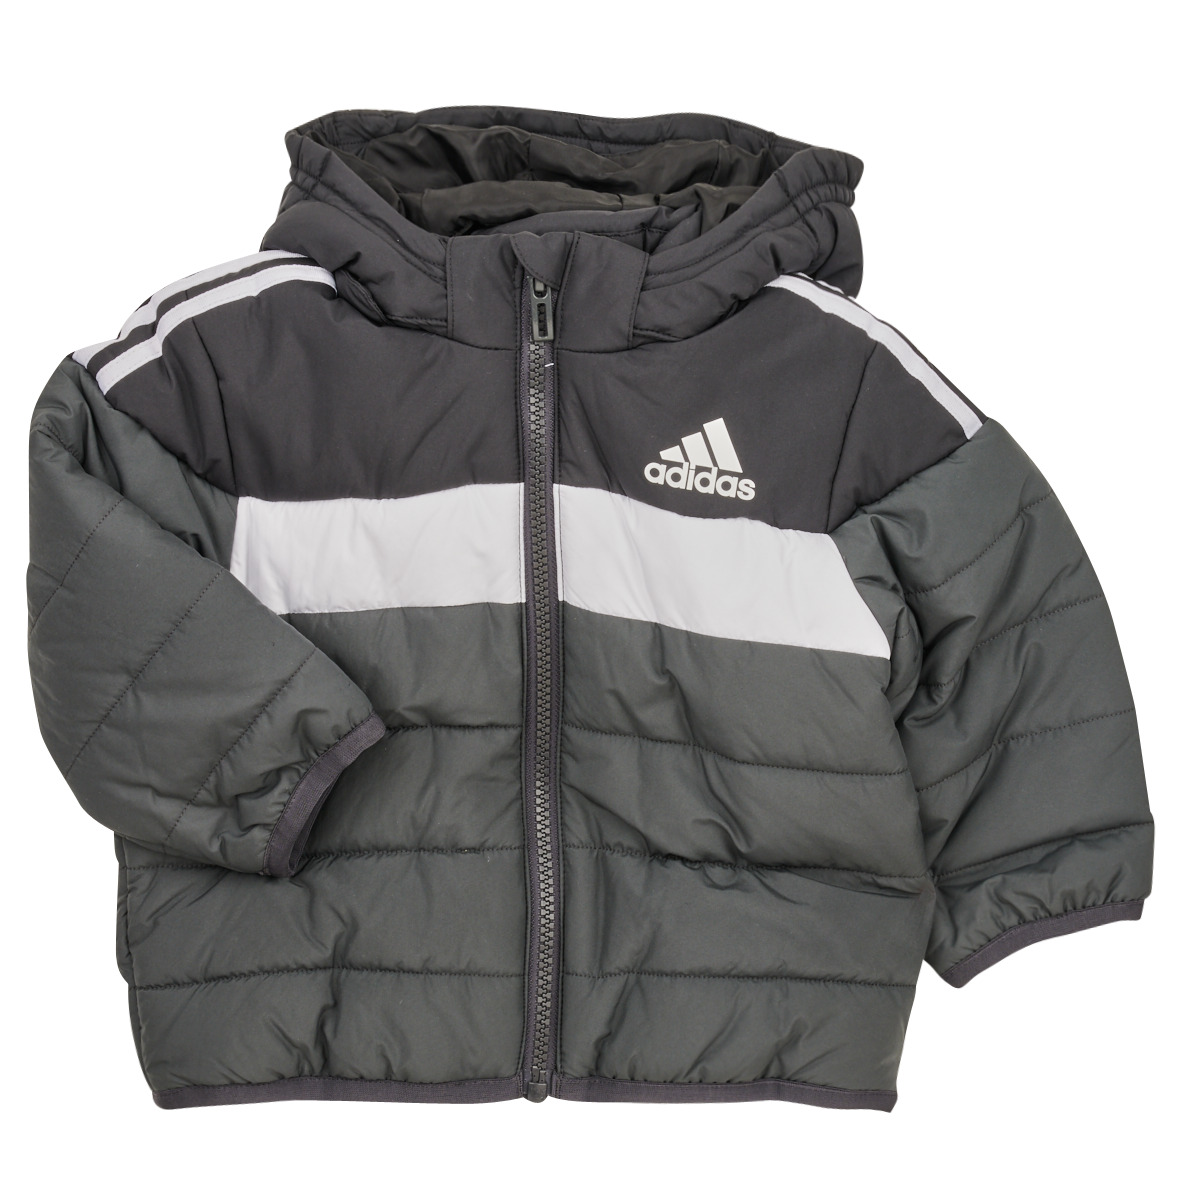 Adidas Sportswear Duffel IN - NET PAD Black delivery F Free Spartoo - | Child ! Clothing coats JKT